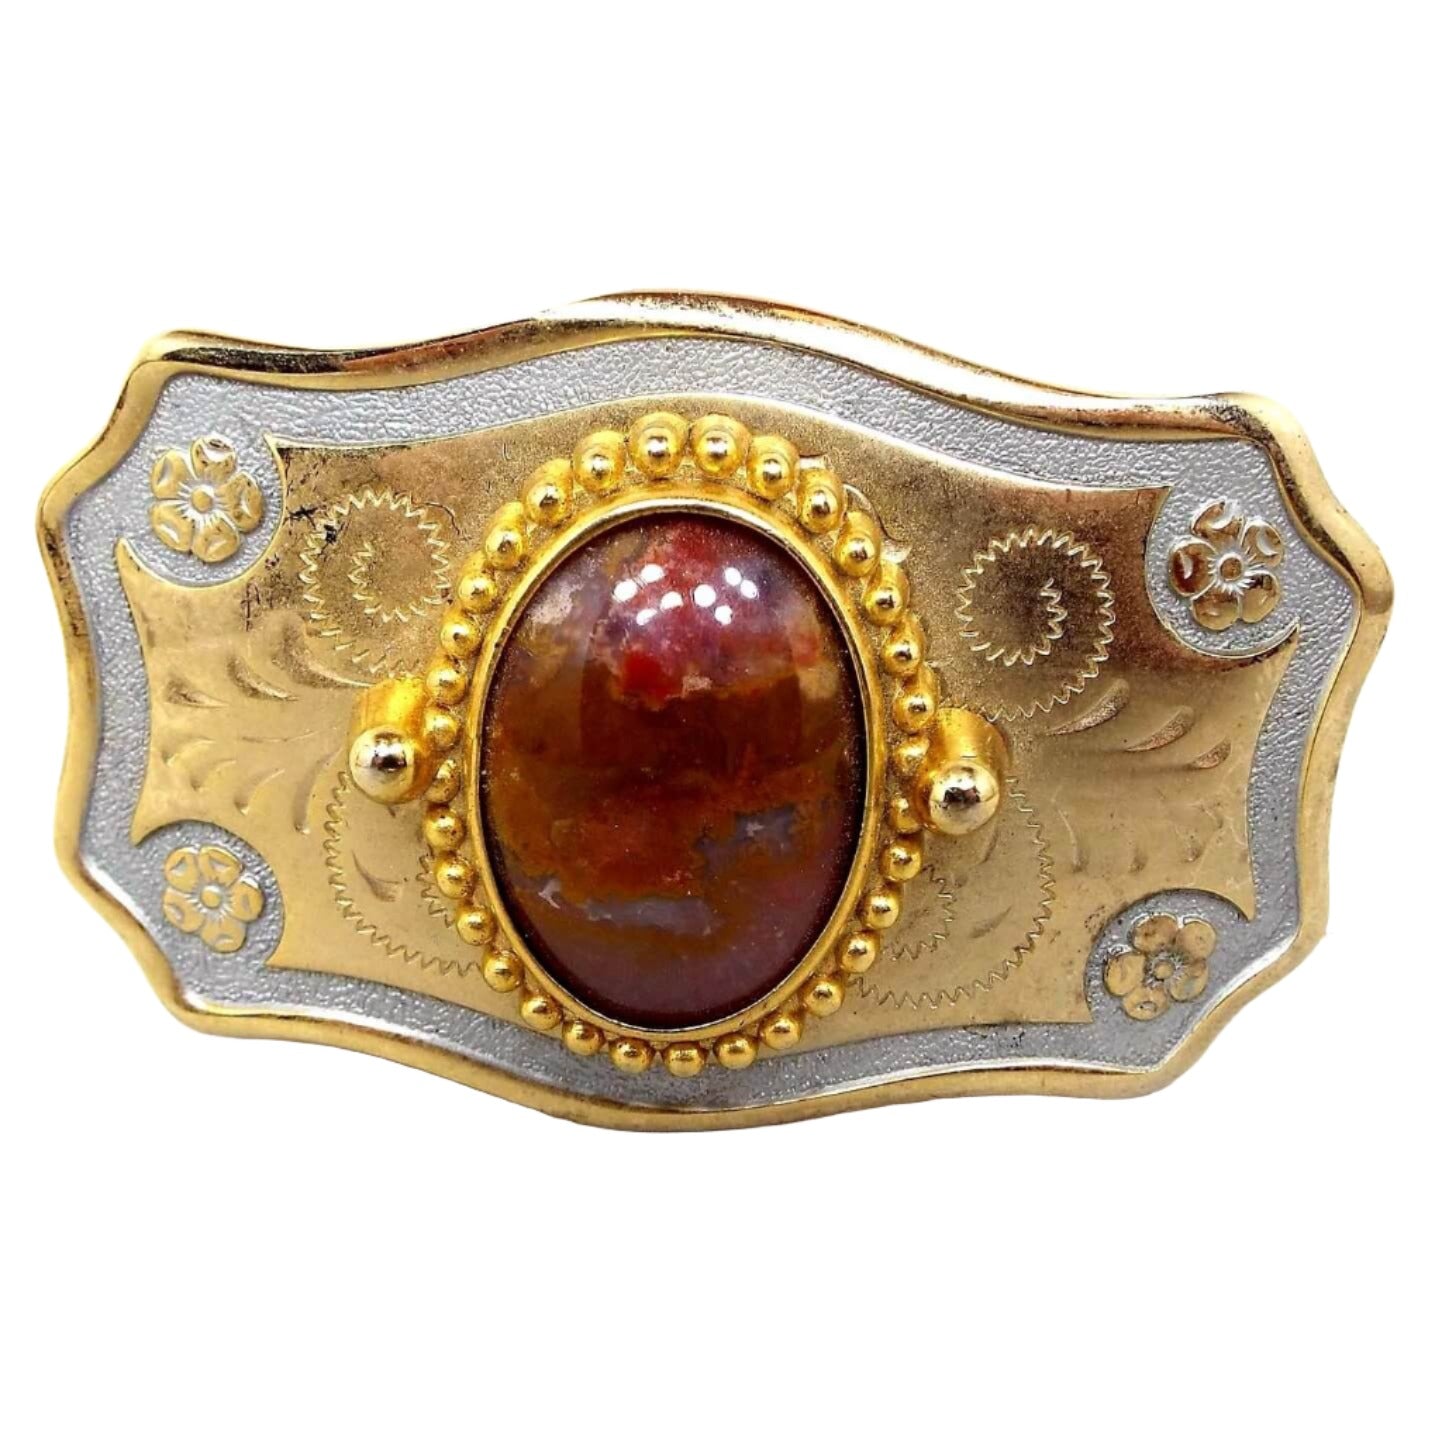 Front view of the retro vintage agate gemstone belt buckle. The buckle is mostly gold tone in color with silver tone around the edge. There are flowers at the corners and an etched design in the middle area. In the very middle is an oval agate cab with shades of brown and orange.